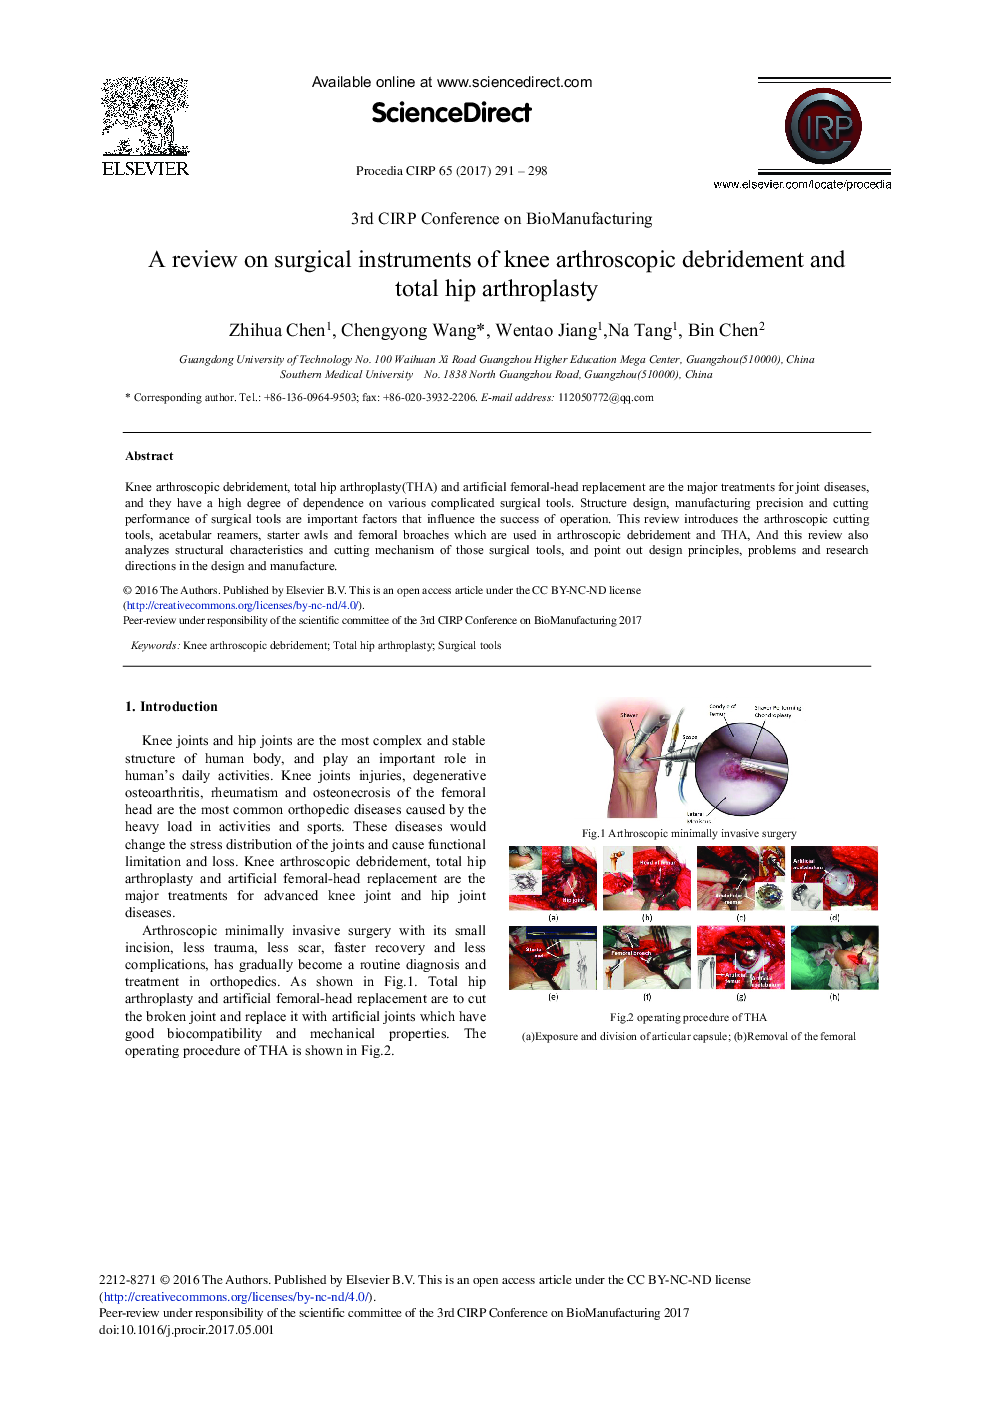 A Review on Surgical Instruments of Knee Arthroscopic Debridement and Total Hip Arthroplasty